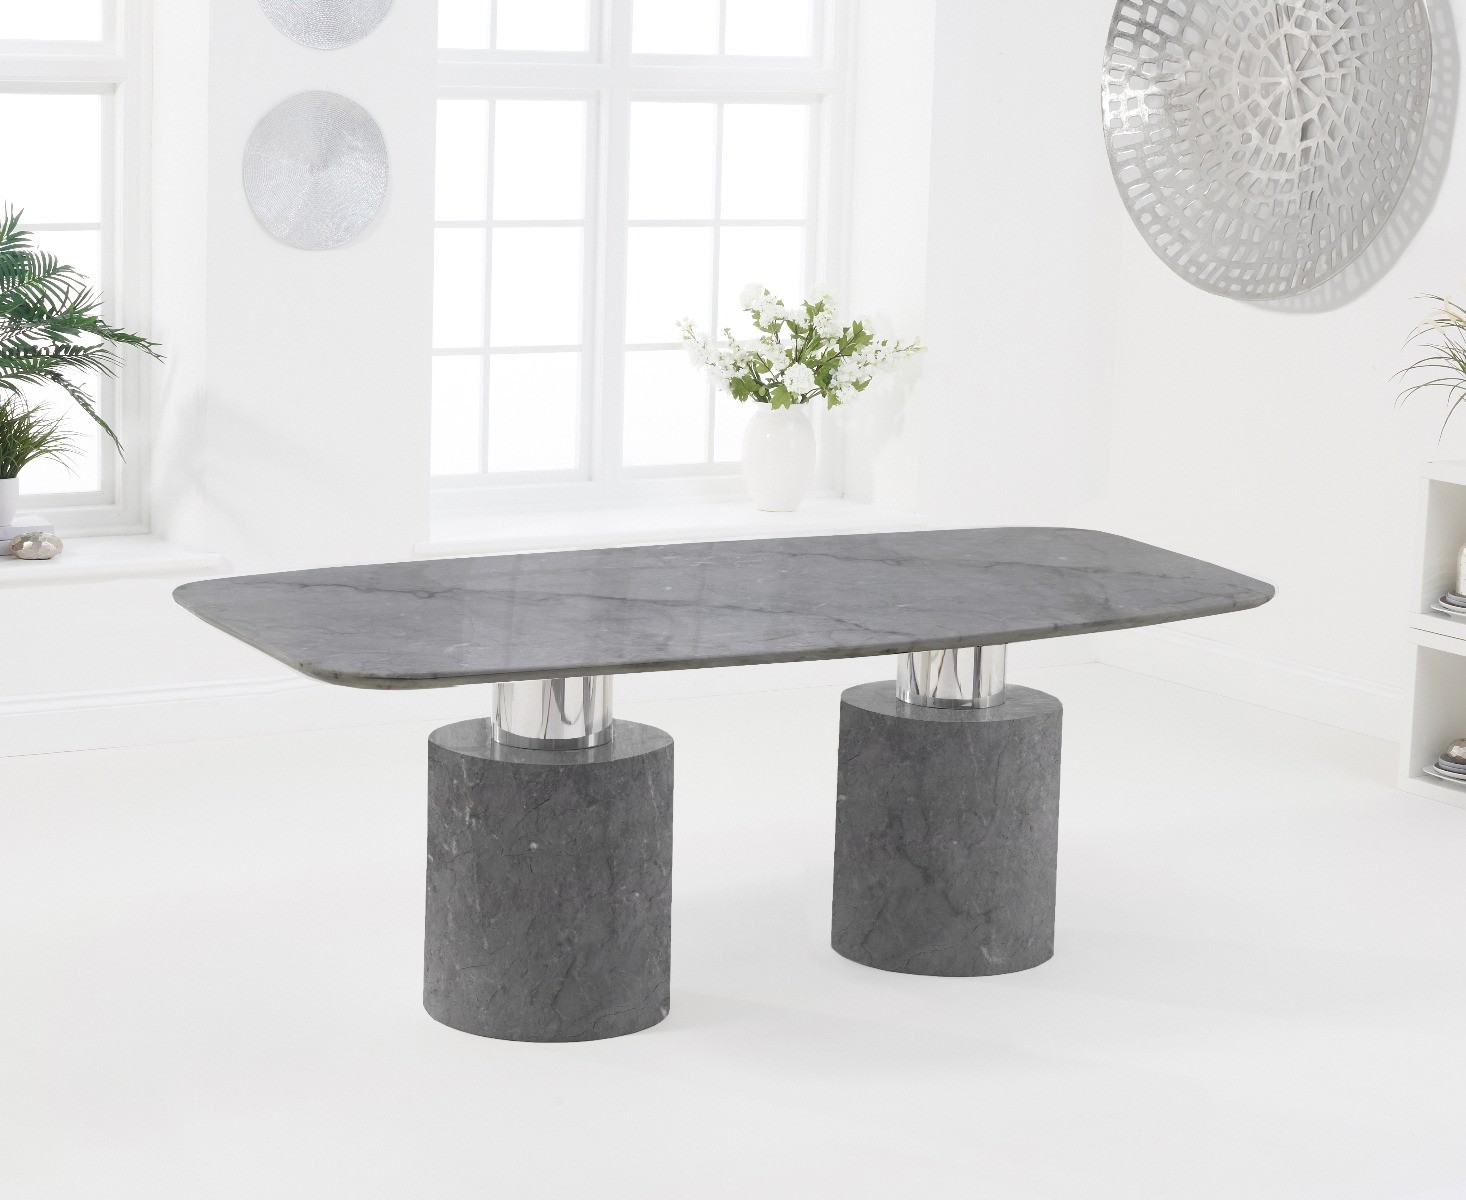 Photo 3 of Antonio 180cm grey marble dining table with 8 grey lorenzo chairs